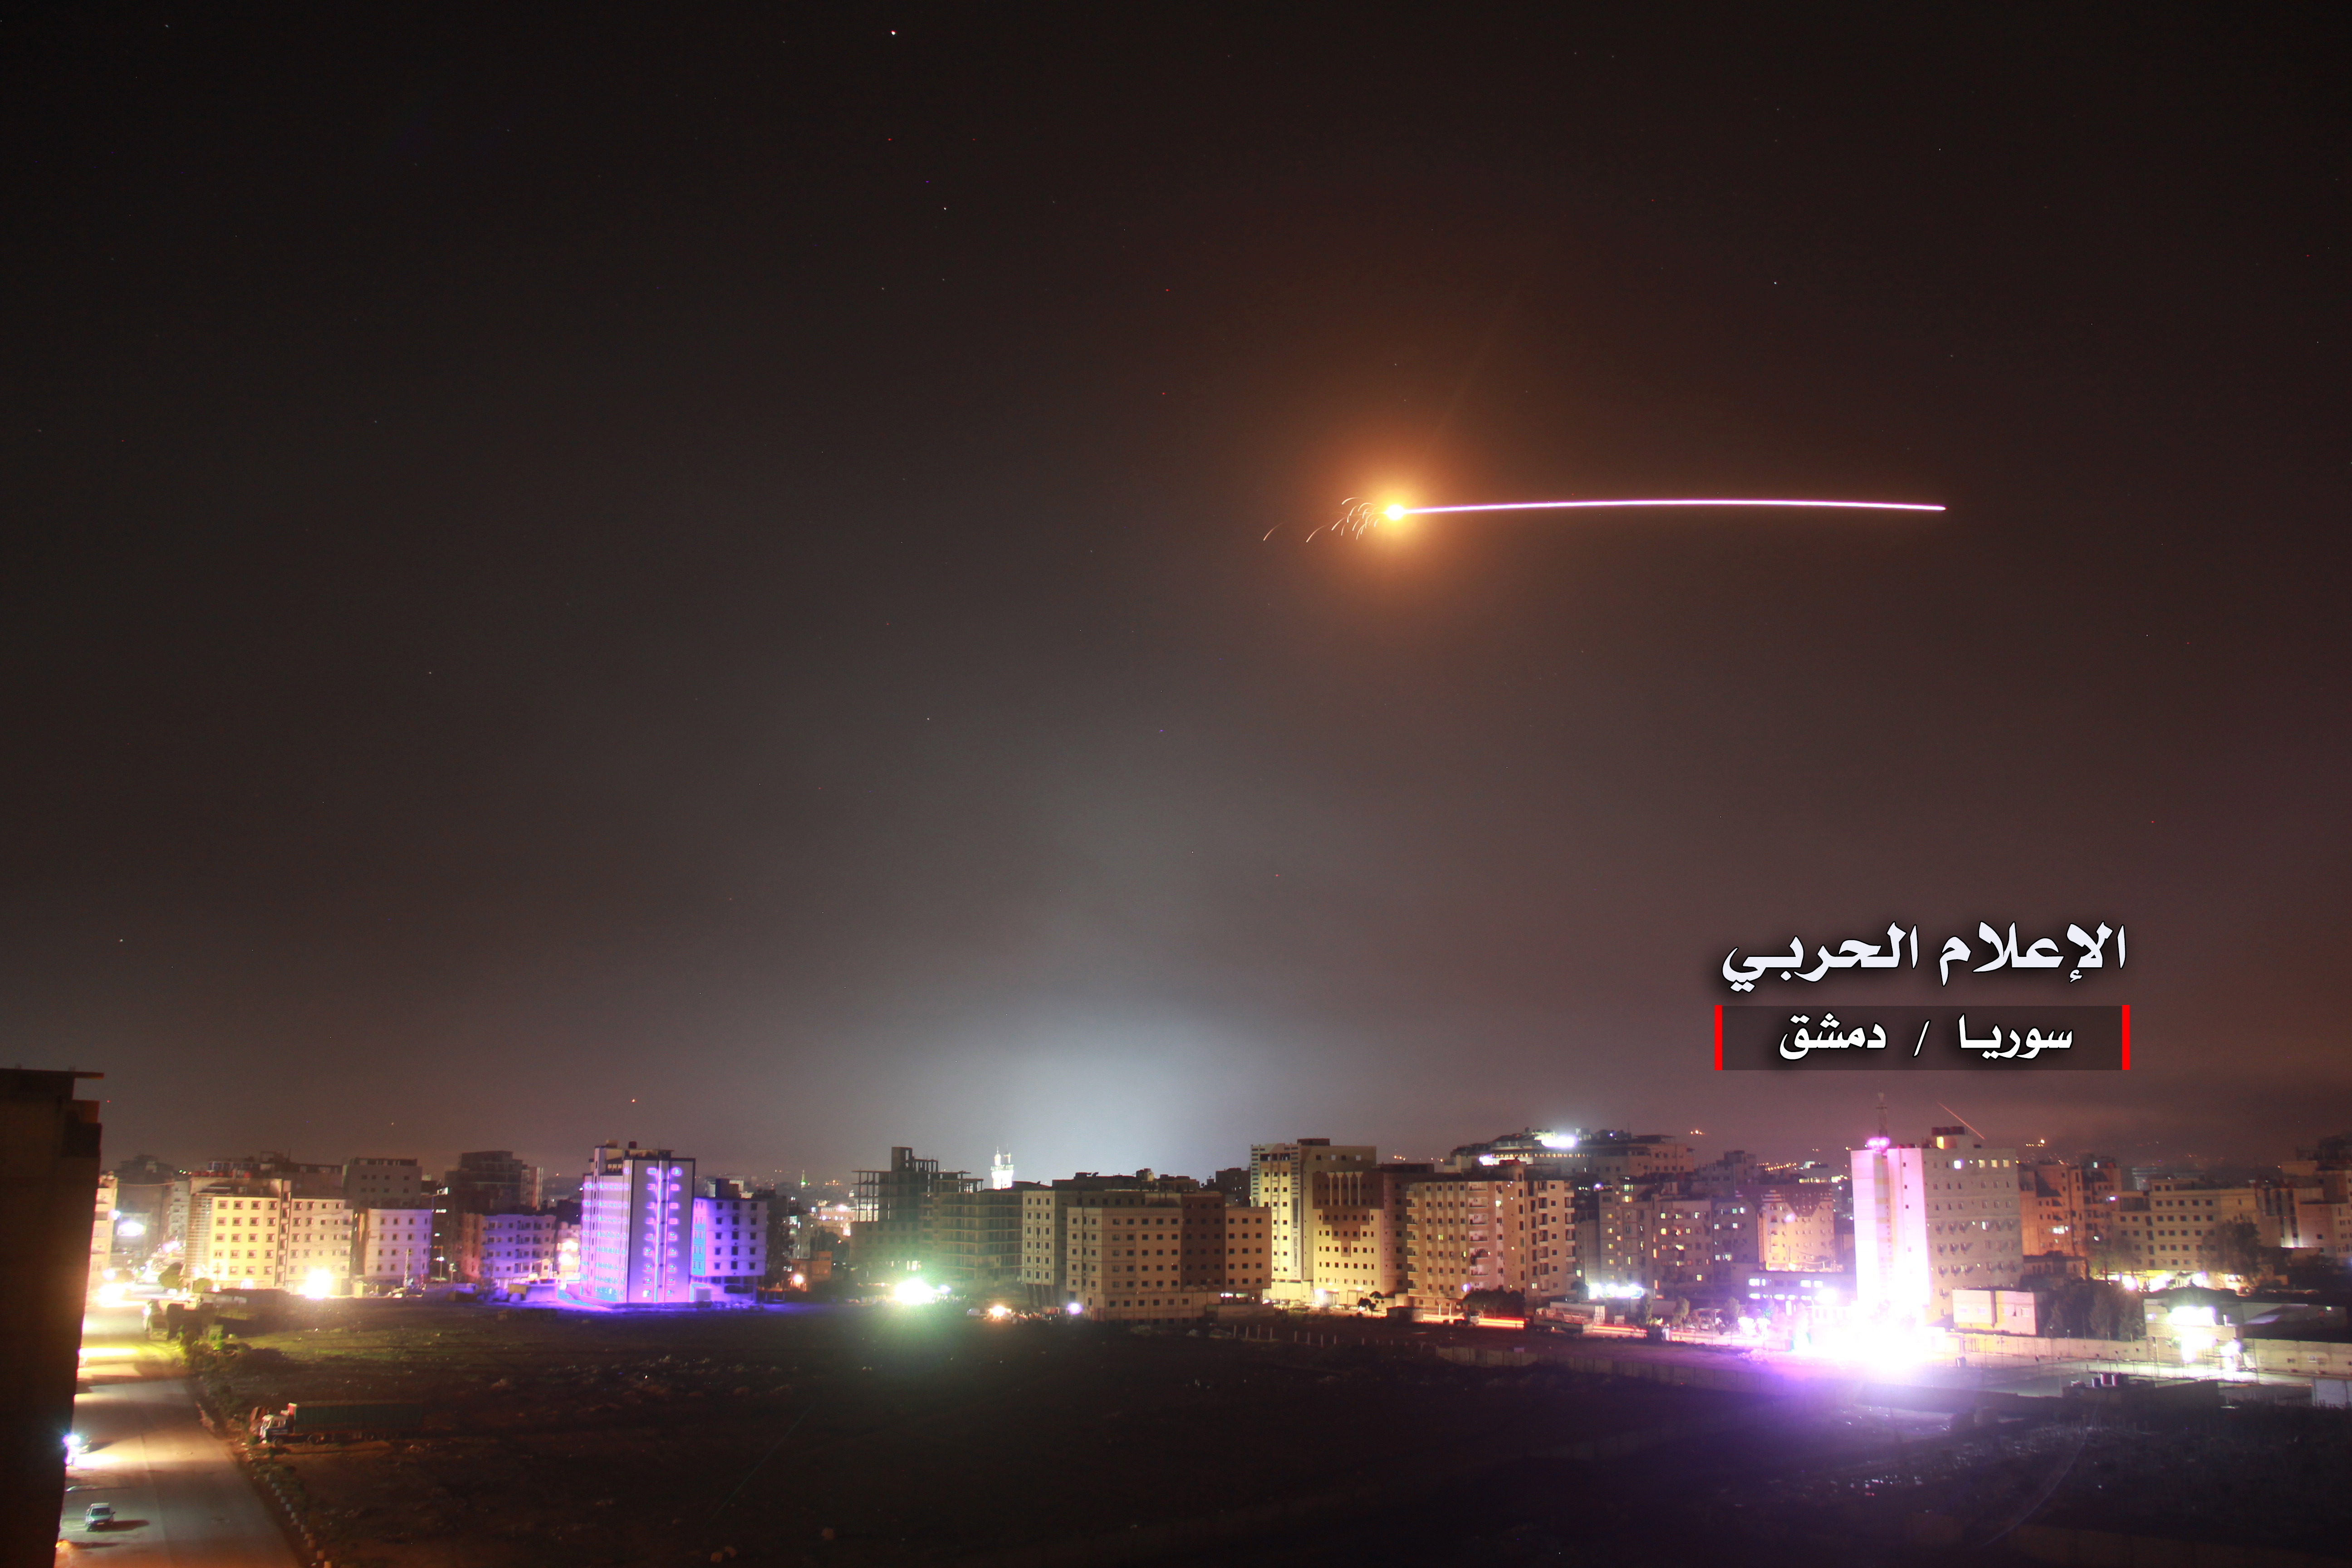 A handout photo made available by government-affiliated Syrian Military Media is said to show Syrian air defense missiles intercepting missile strikes over Damascus, Syria, 09 May 2018 (issued 10 May 2018). According to Syrian official media reports, the air defense was responding to a new wave of Israeli missile strikes. EPA/SYRIAN MILITARY MEDIA HANDOUT 